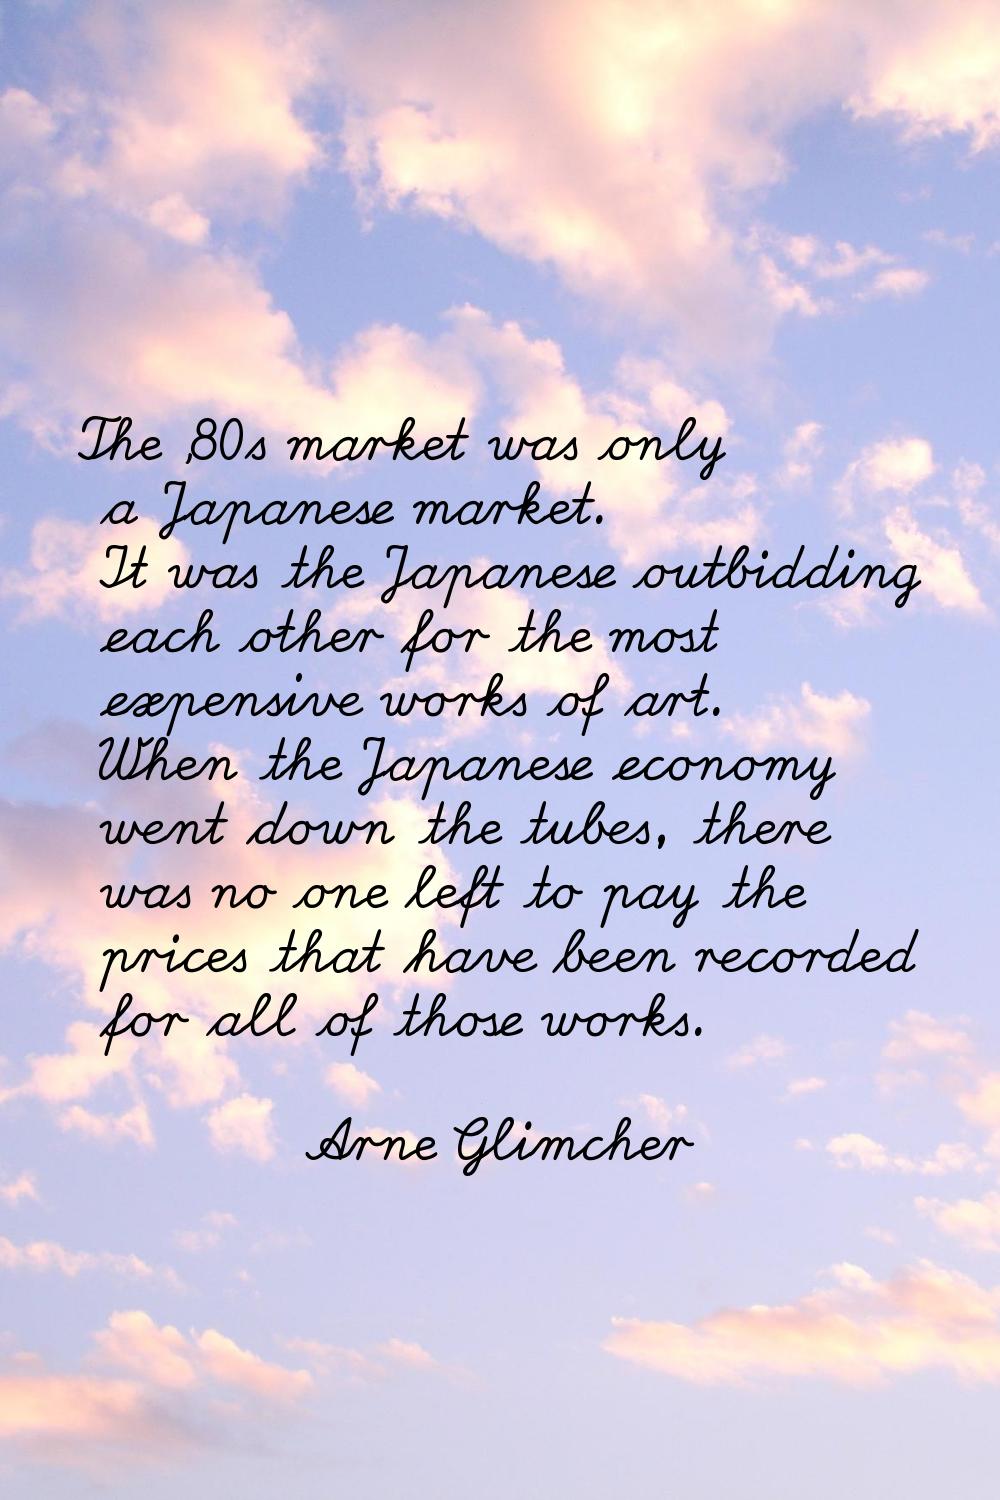 The '80s market was only a Japanese market. It was the Japanese outbidding each other for the most 